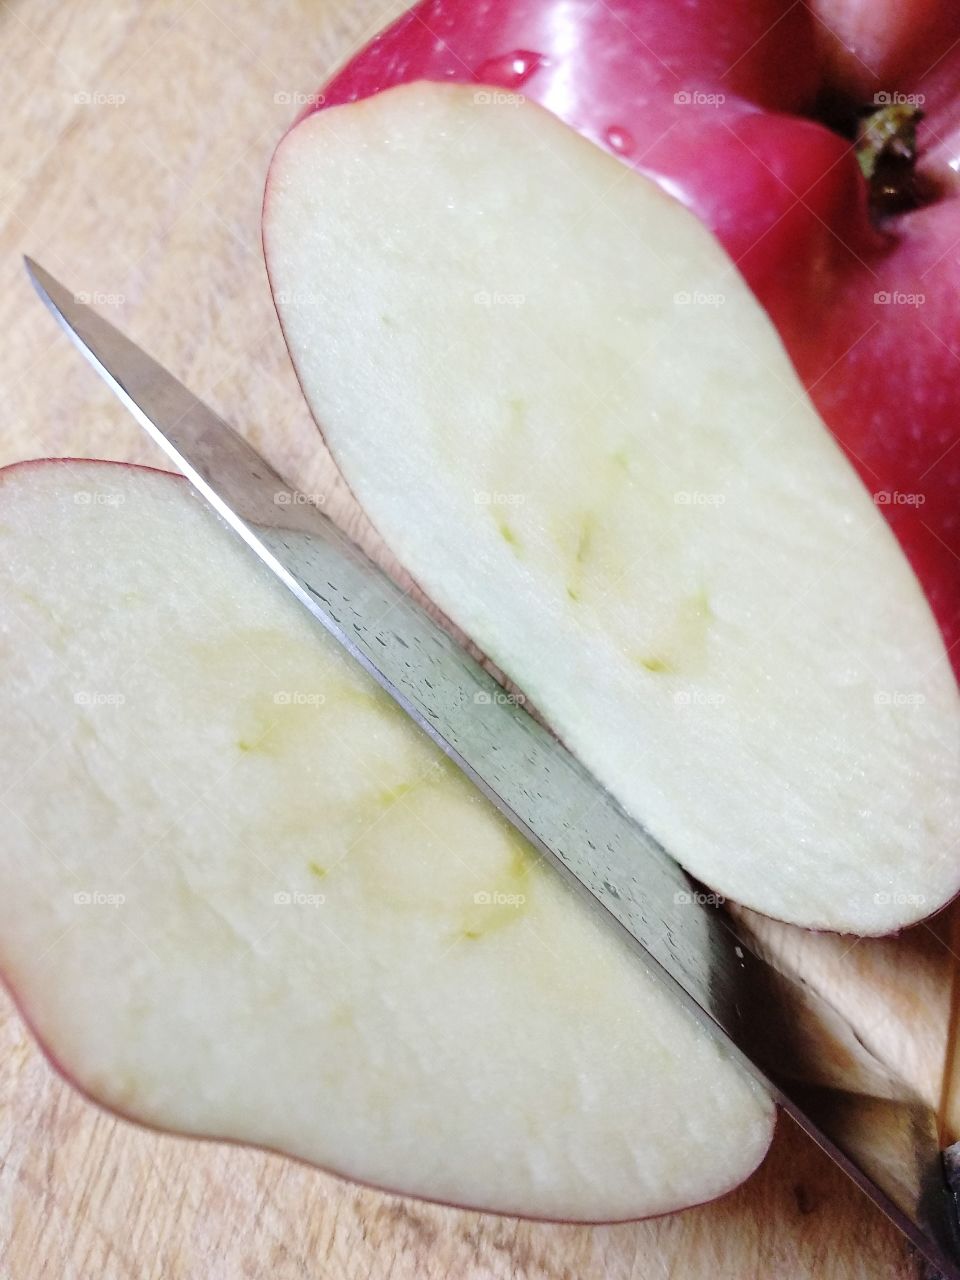 The piece of apple which is cut off by a knife close up